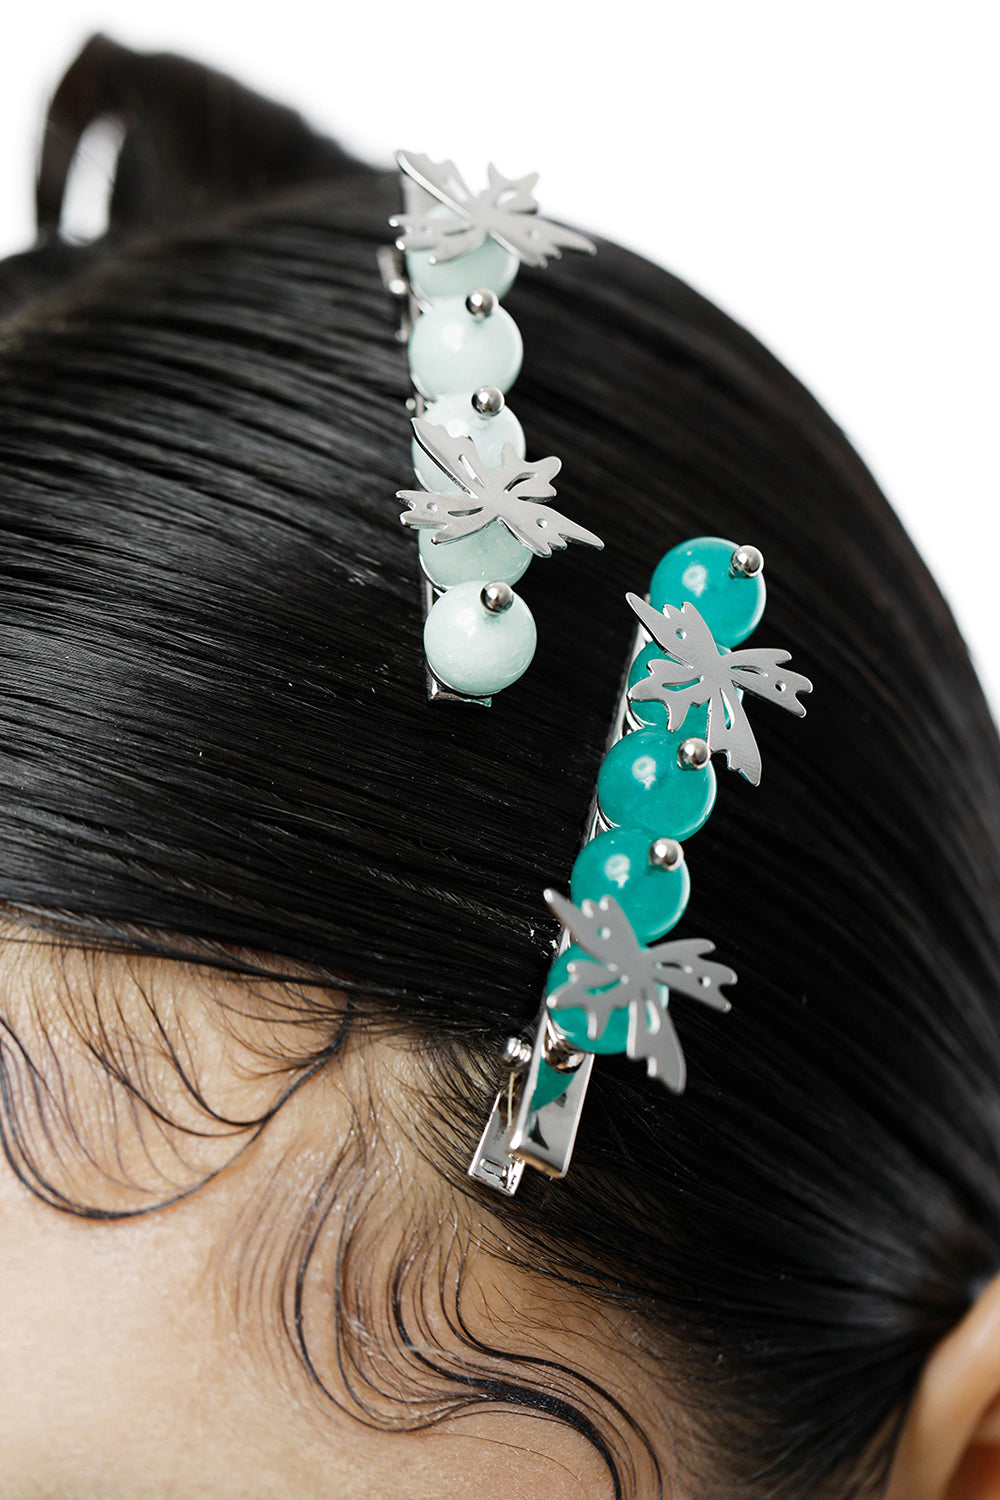 Jade Beads And Fantasy Flower Hair Clips